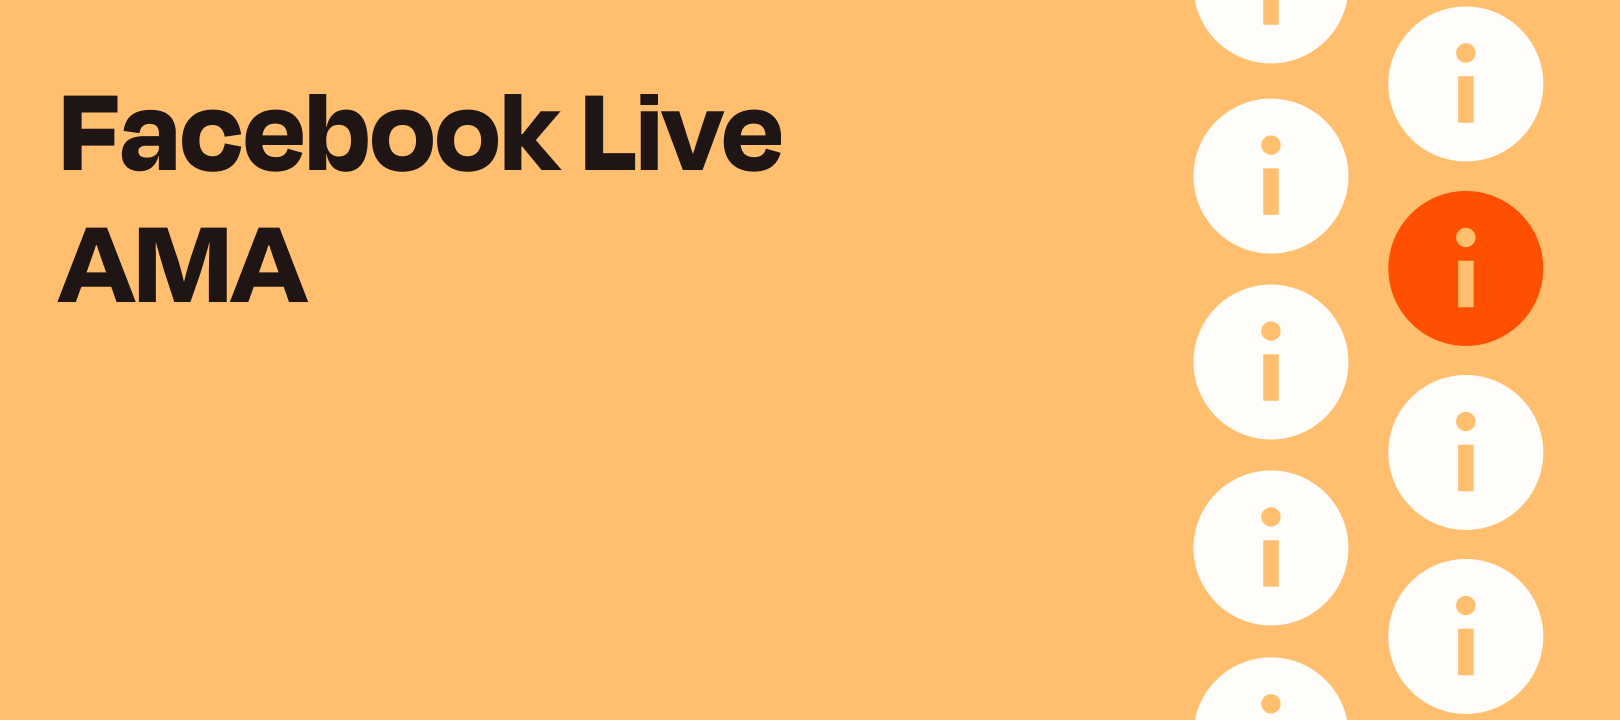 Join us on Facebook Live for an AMA with Zapier Expert Dobbin Buck